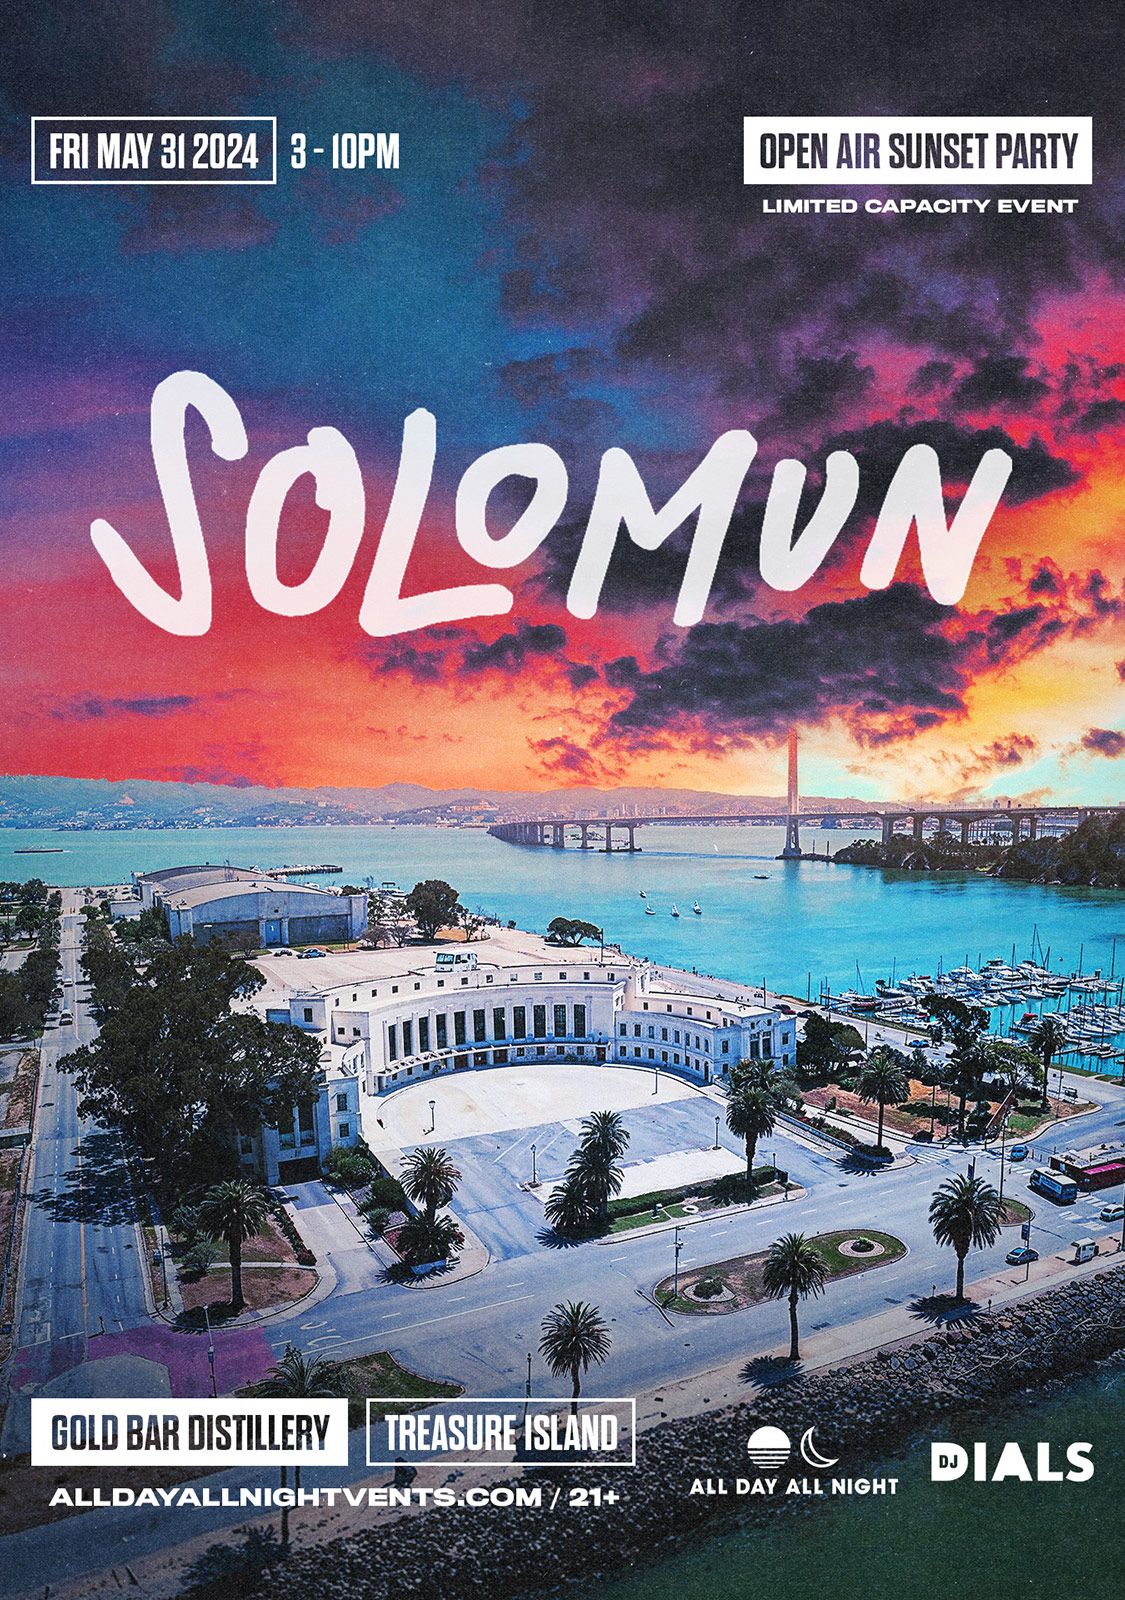 Sunset Party with Solomun